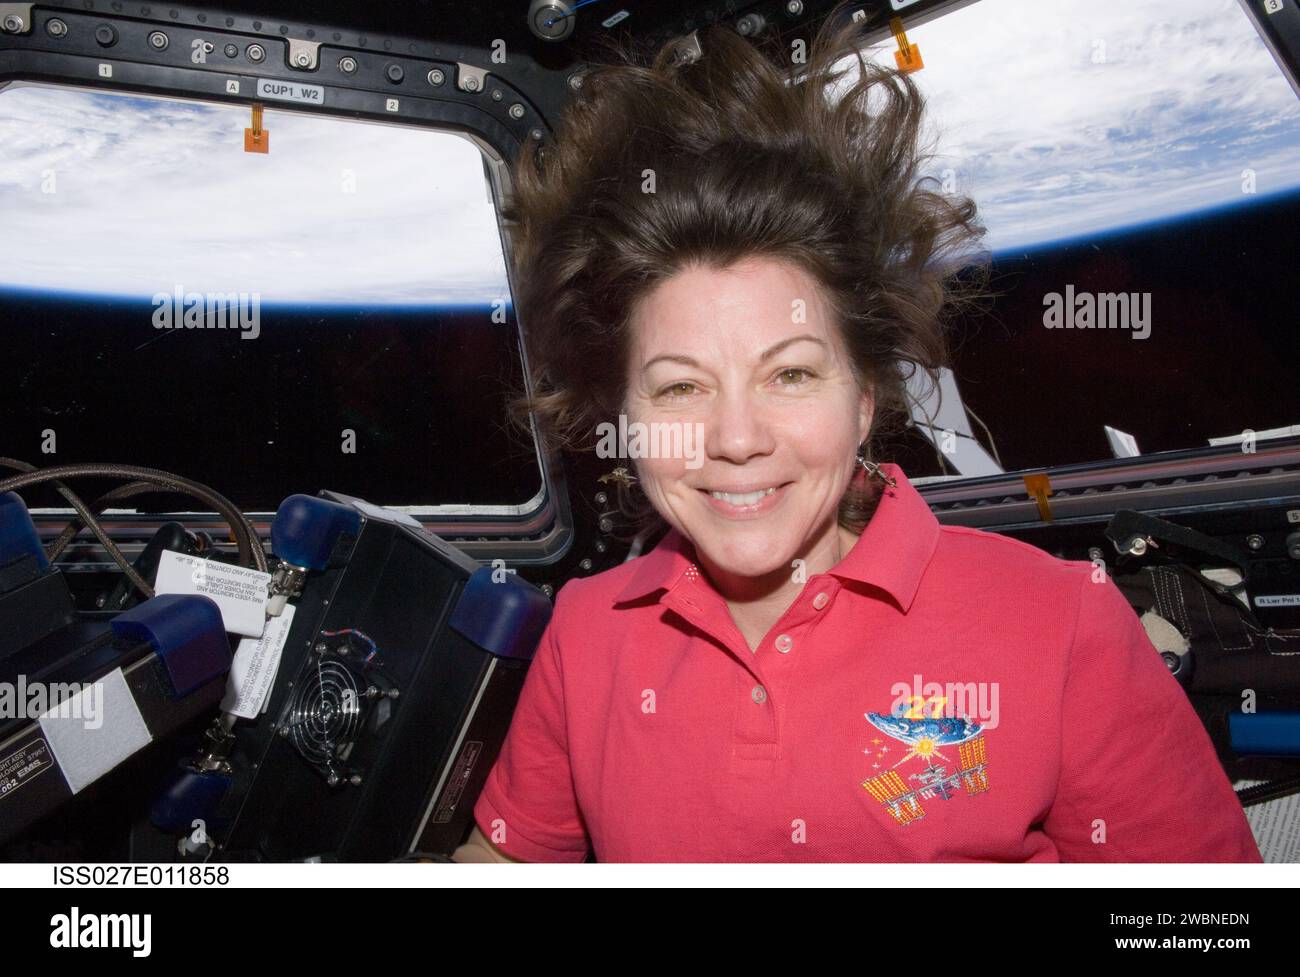 ISS027-E-011858 (7 April 2011) --- NASA astronaut Cady Coleman, Expedition 27 flight engineer, is pictured in the Cupola of the International Space Station. Earth’s horizon and the blackness of space are visible through the windows. Stock Photo